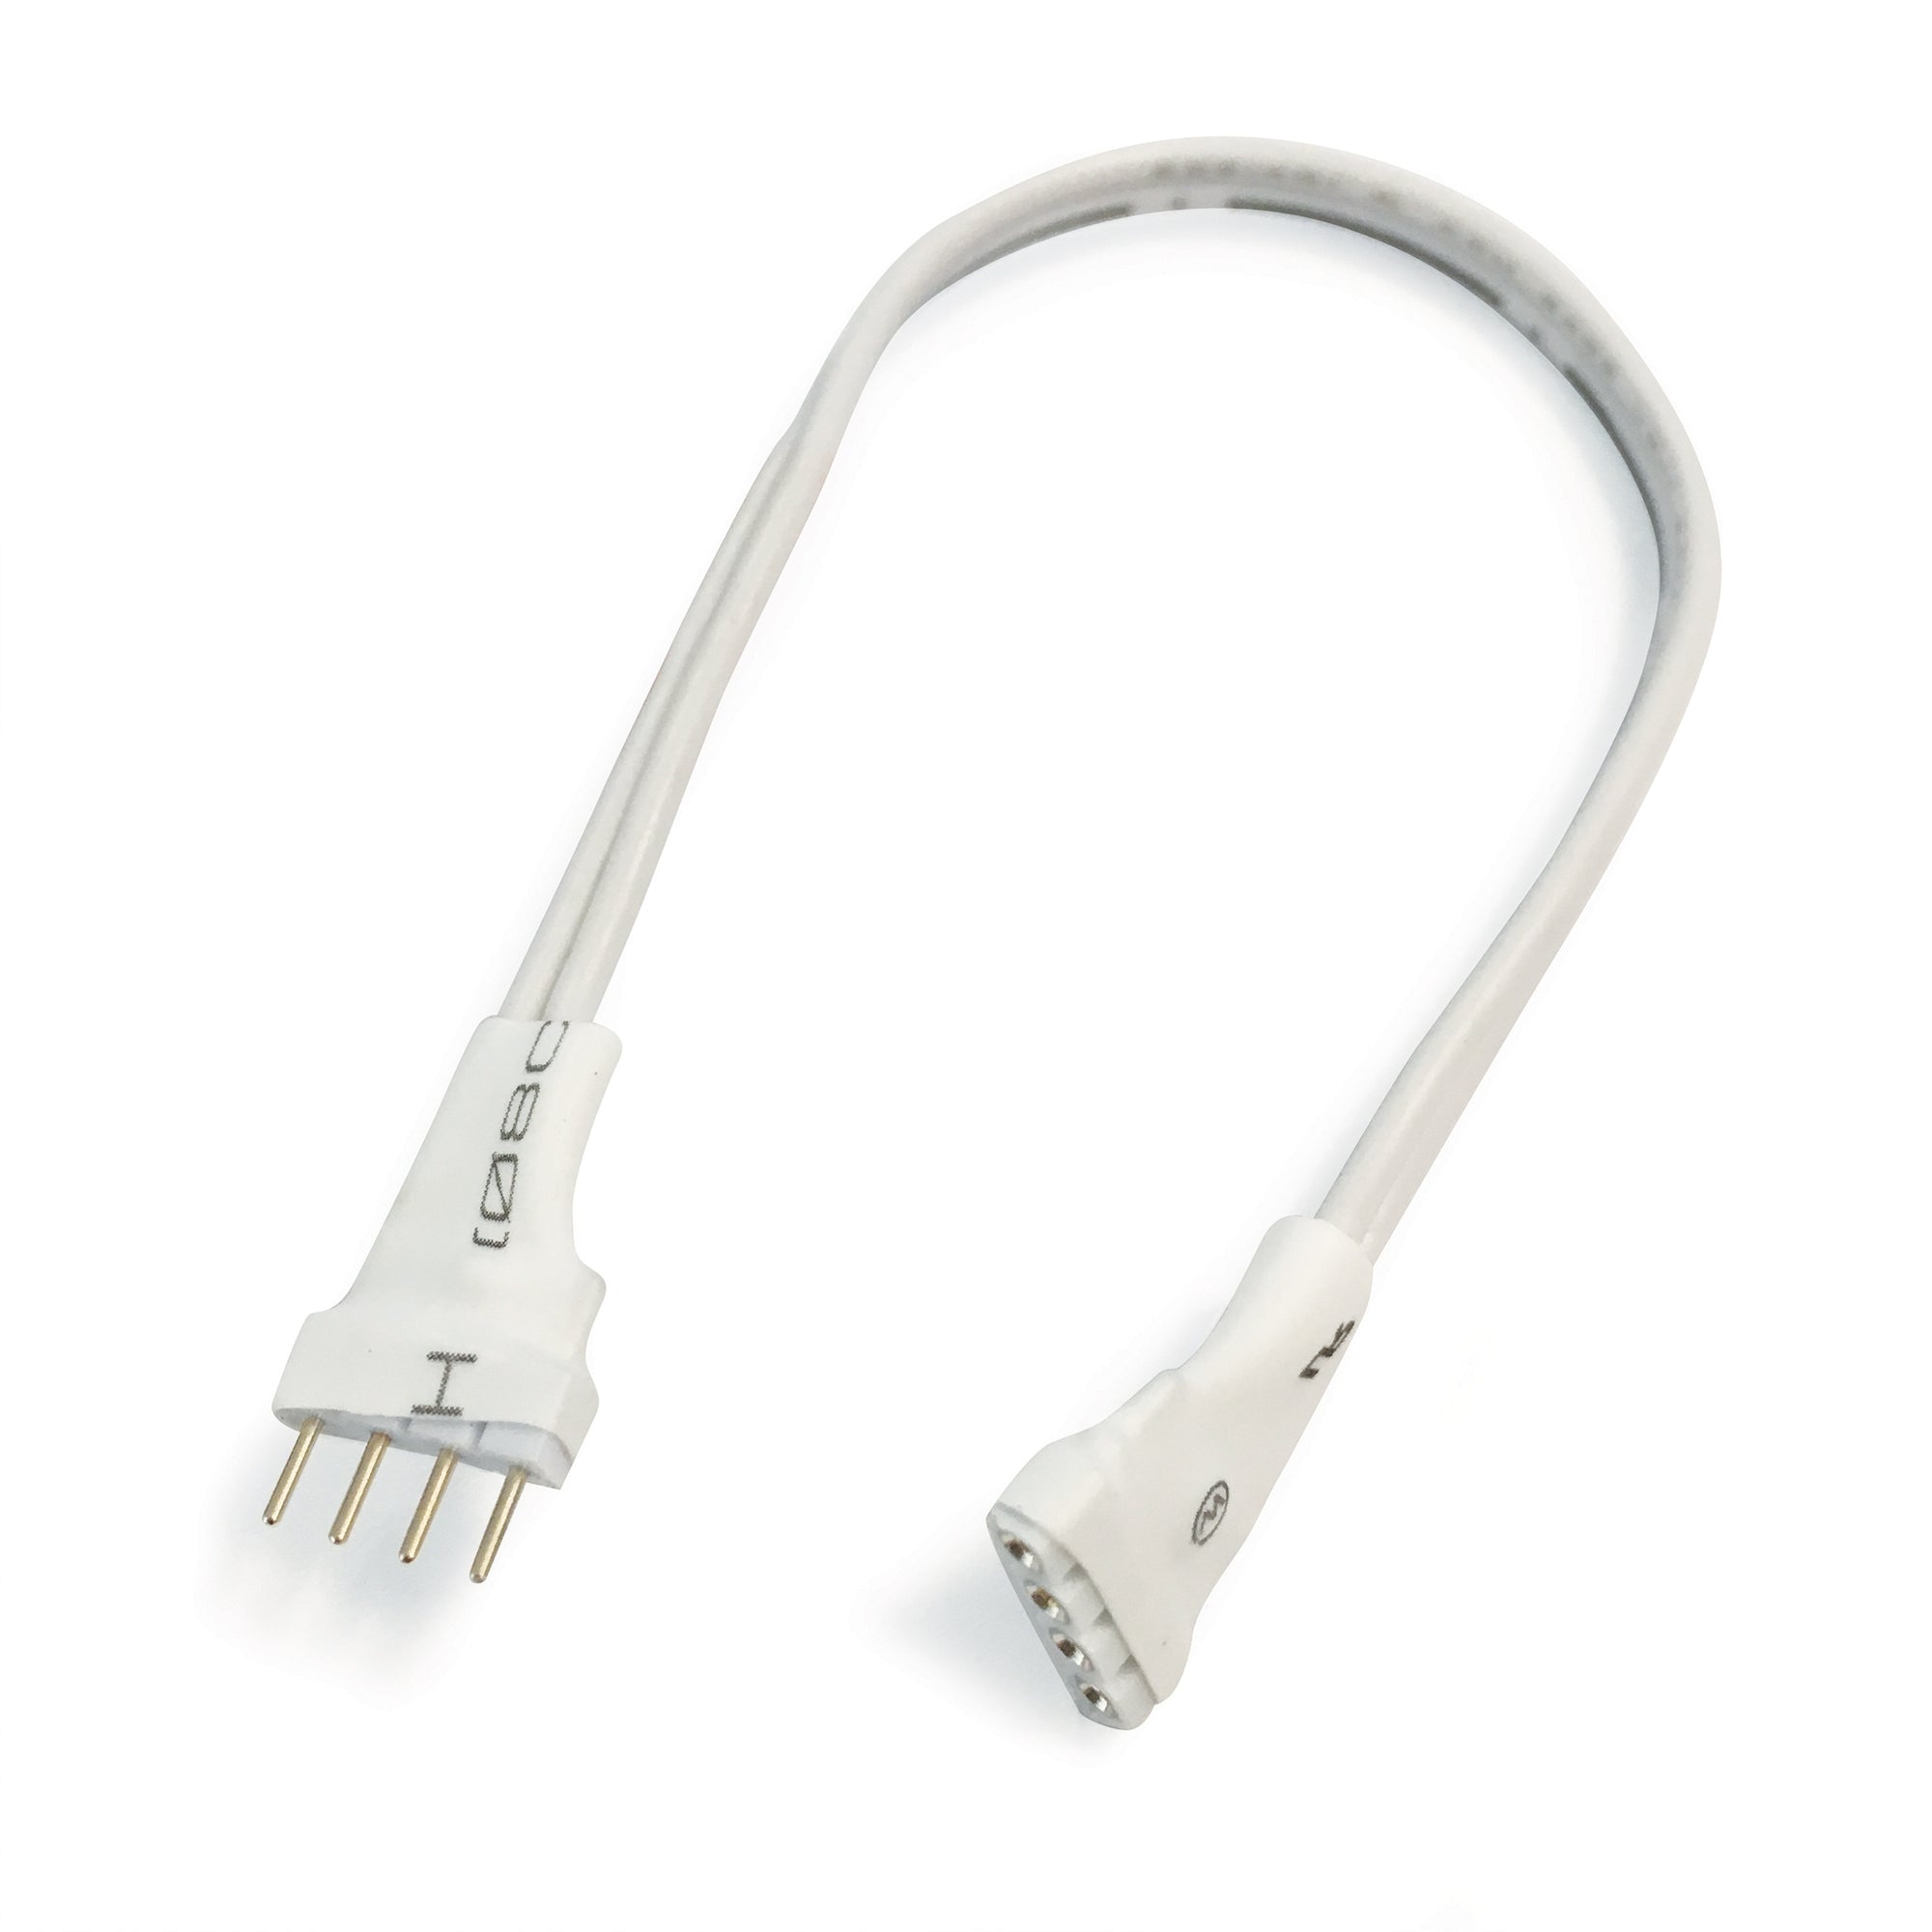 Nora Lighting NARGBW-918W 18" Interconnection Cable For RGBW Tape Light - White